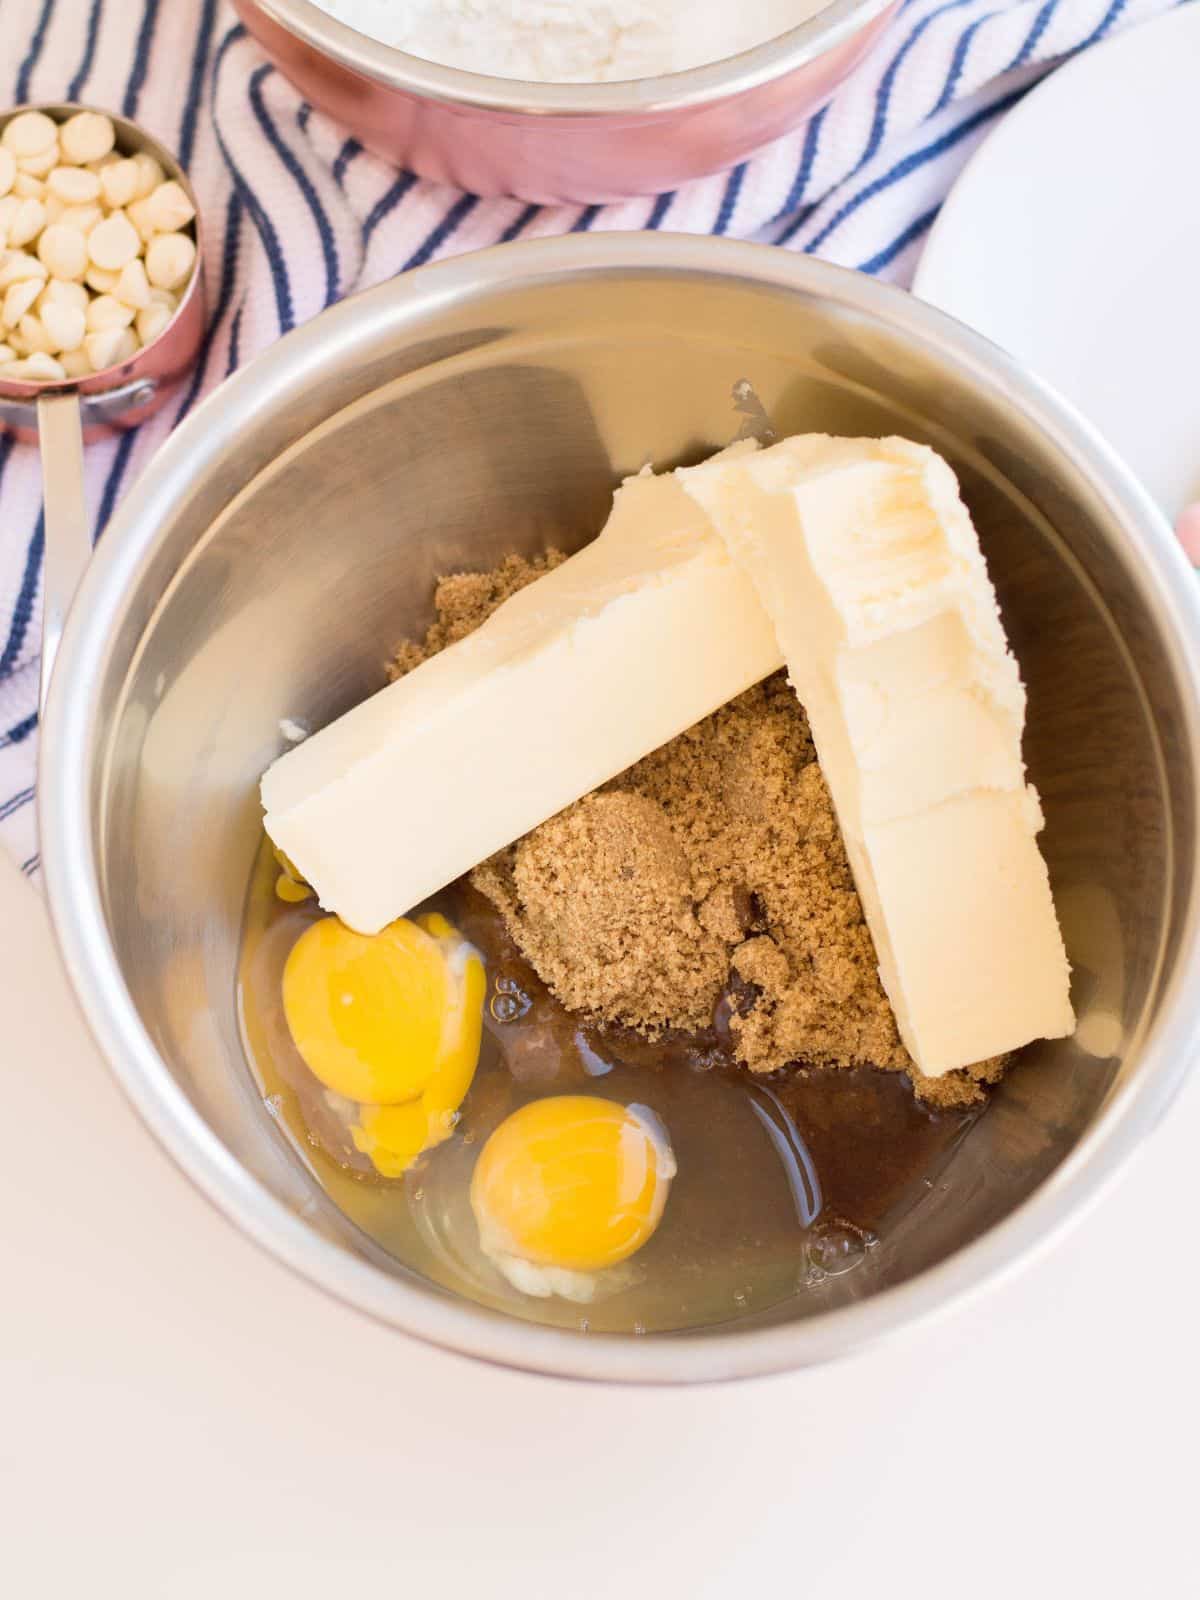 2 sticks of butter, 2 eggs, brown sugar and vanilla in mixing bowl.